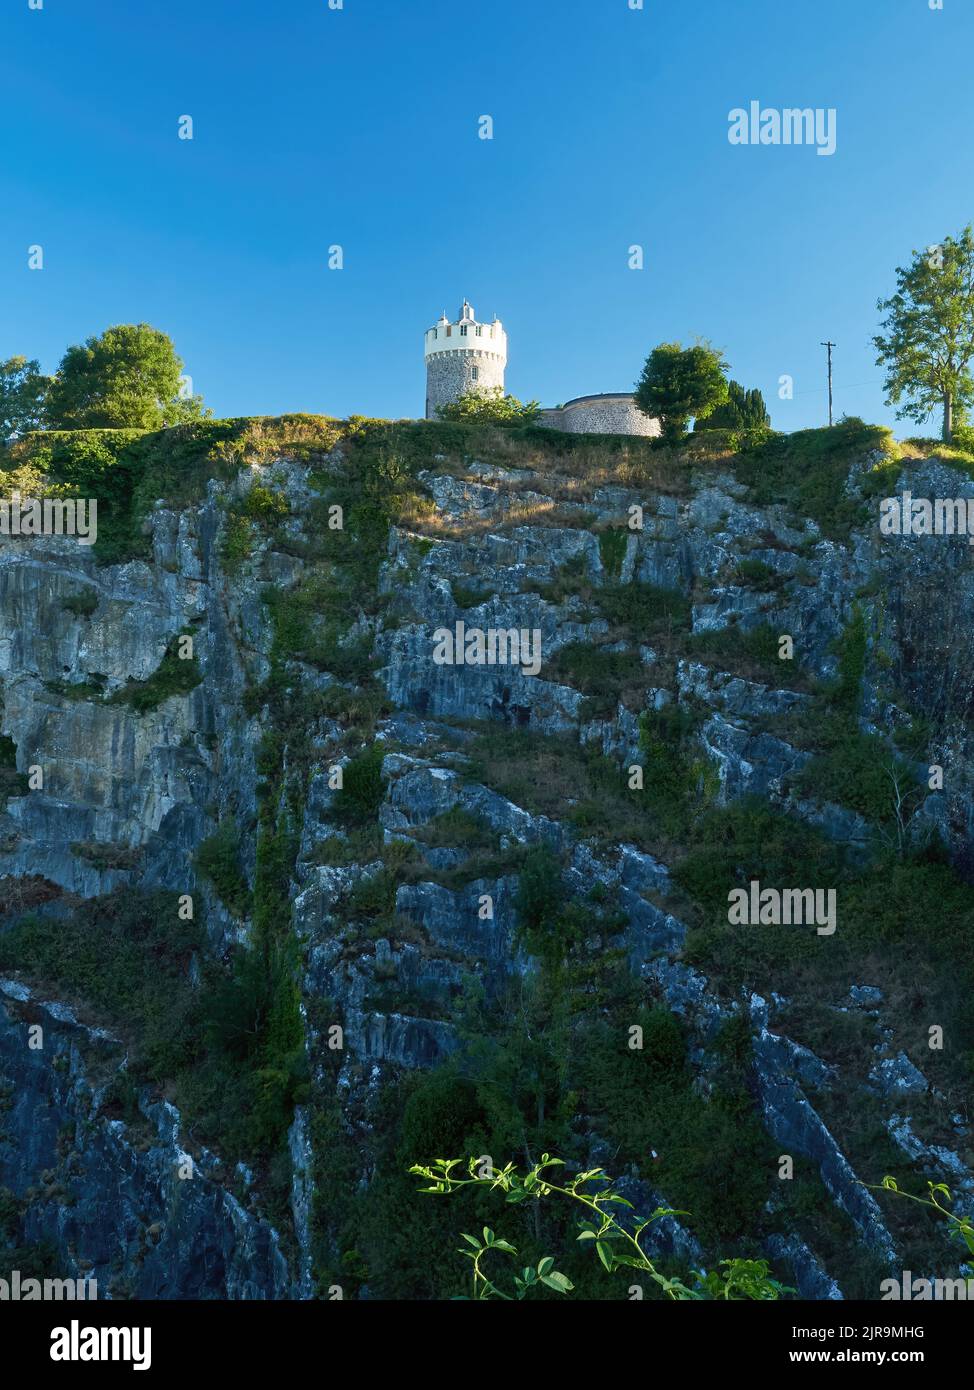 The famous Clifton Observatory, perched on a striated clifftop and balanced on the edge between warm, bright, slanting sunlight and cool shade. Stock Photo